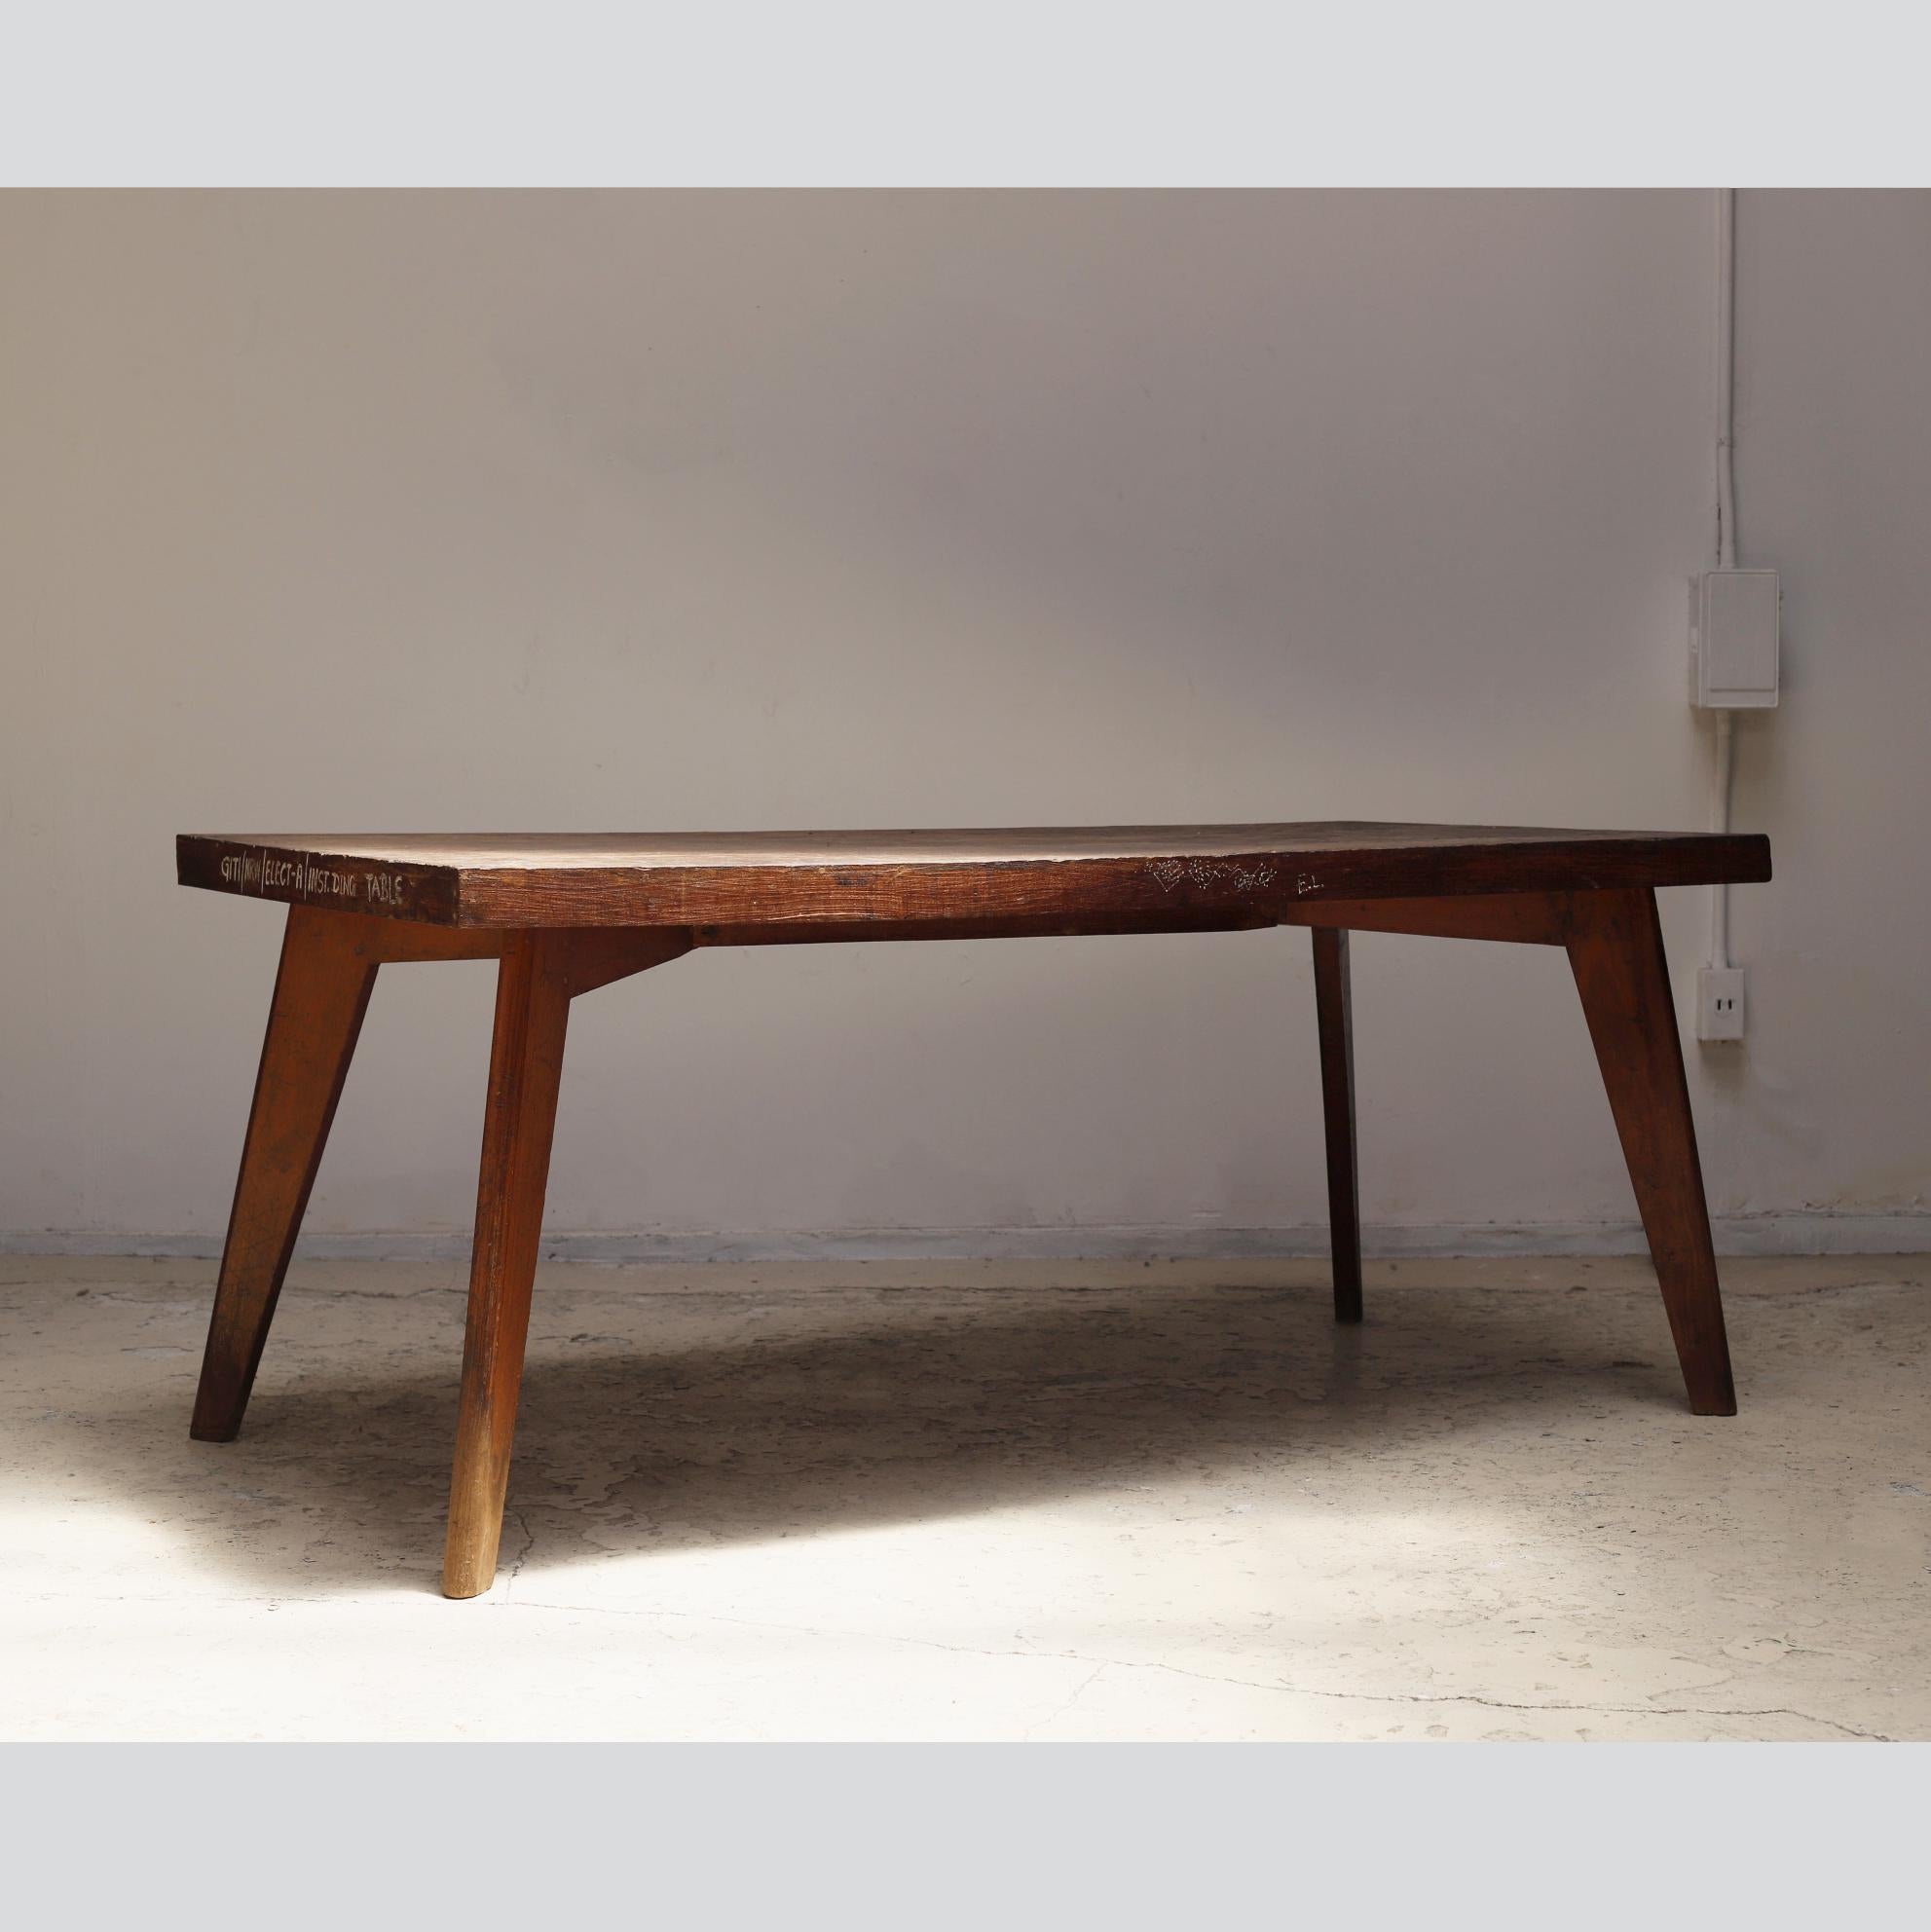 Dining table by Pierre Jeanneret.
Used in the government's electronics laboratory.